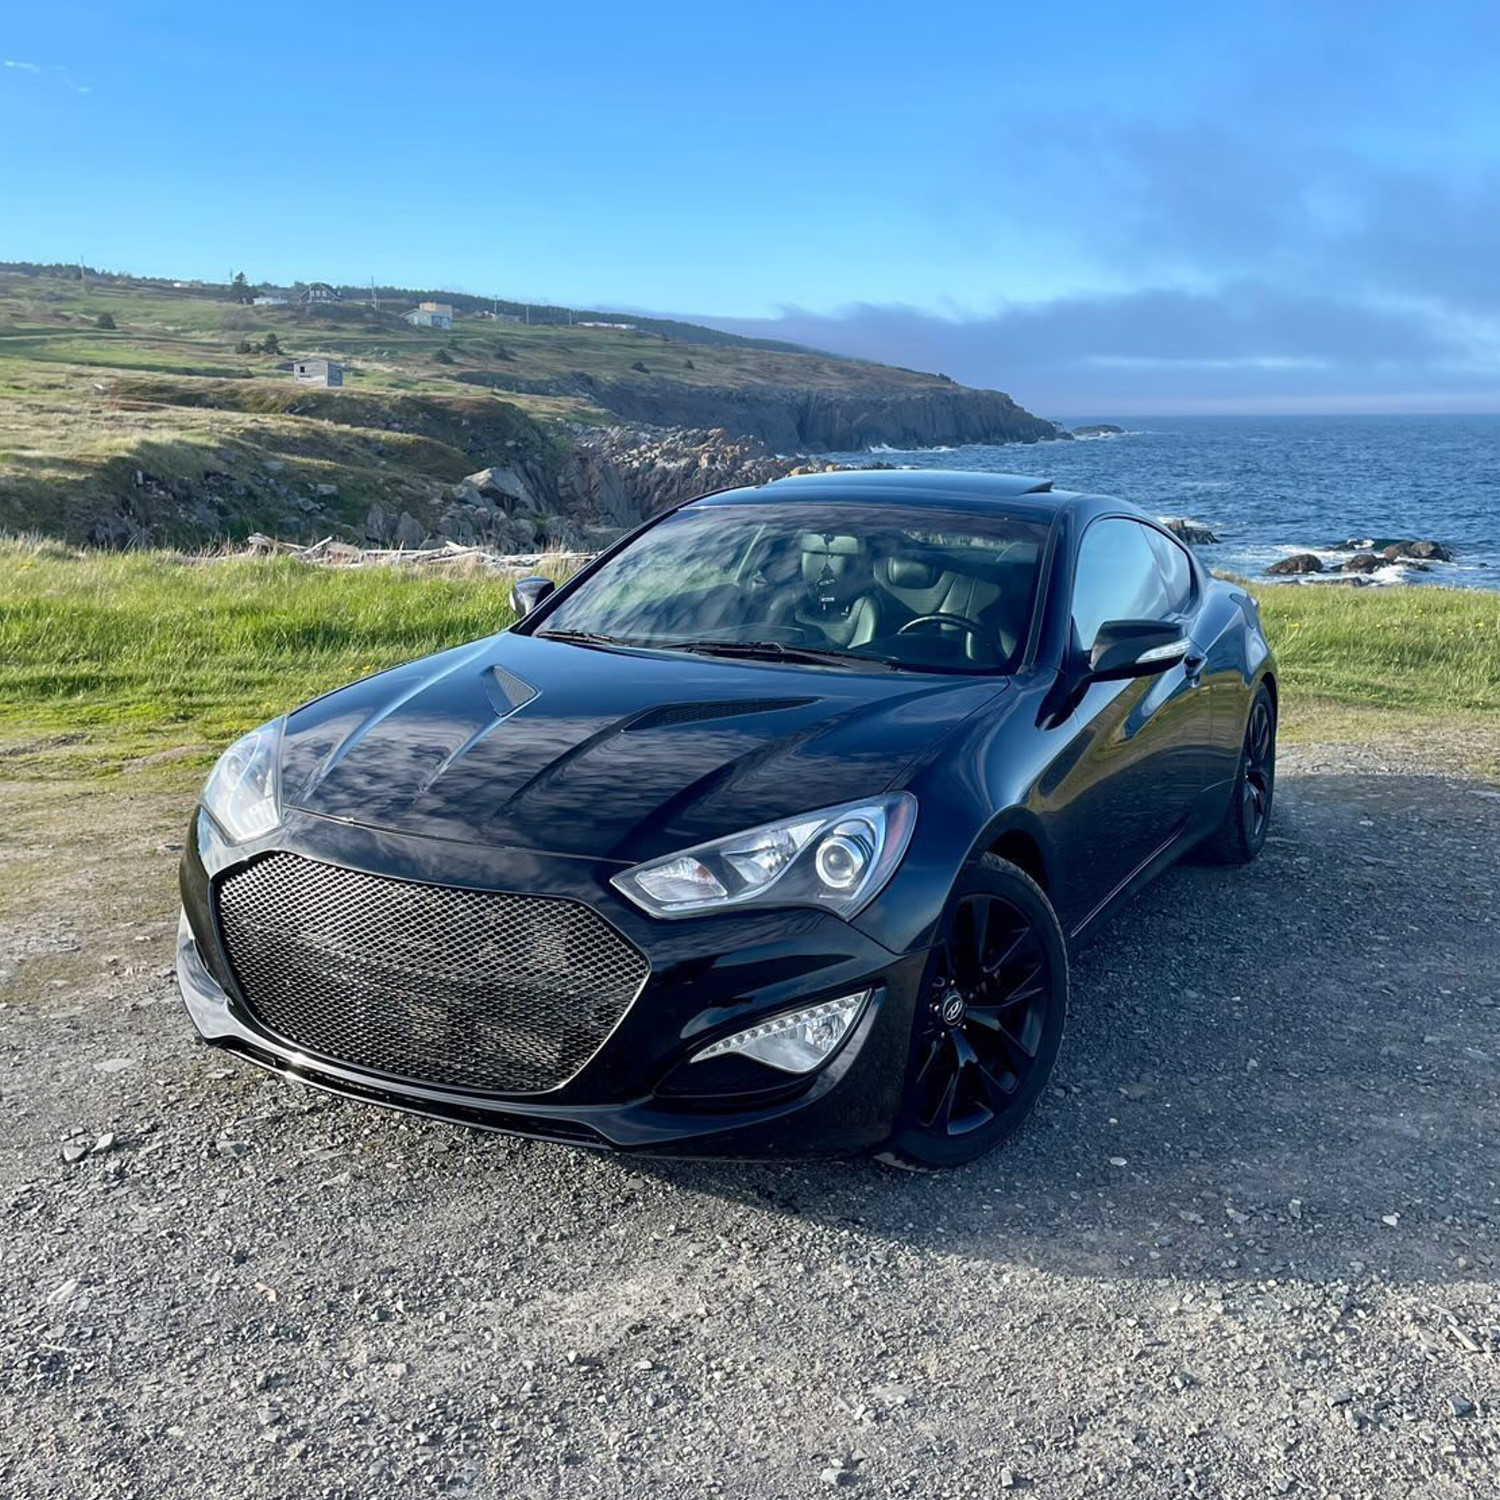 Hyundai Genesis Coupe BK2 out in the Wild with Sleek Custom Mesh Grille